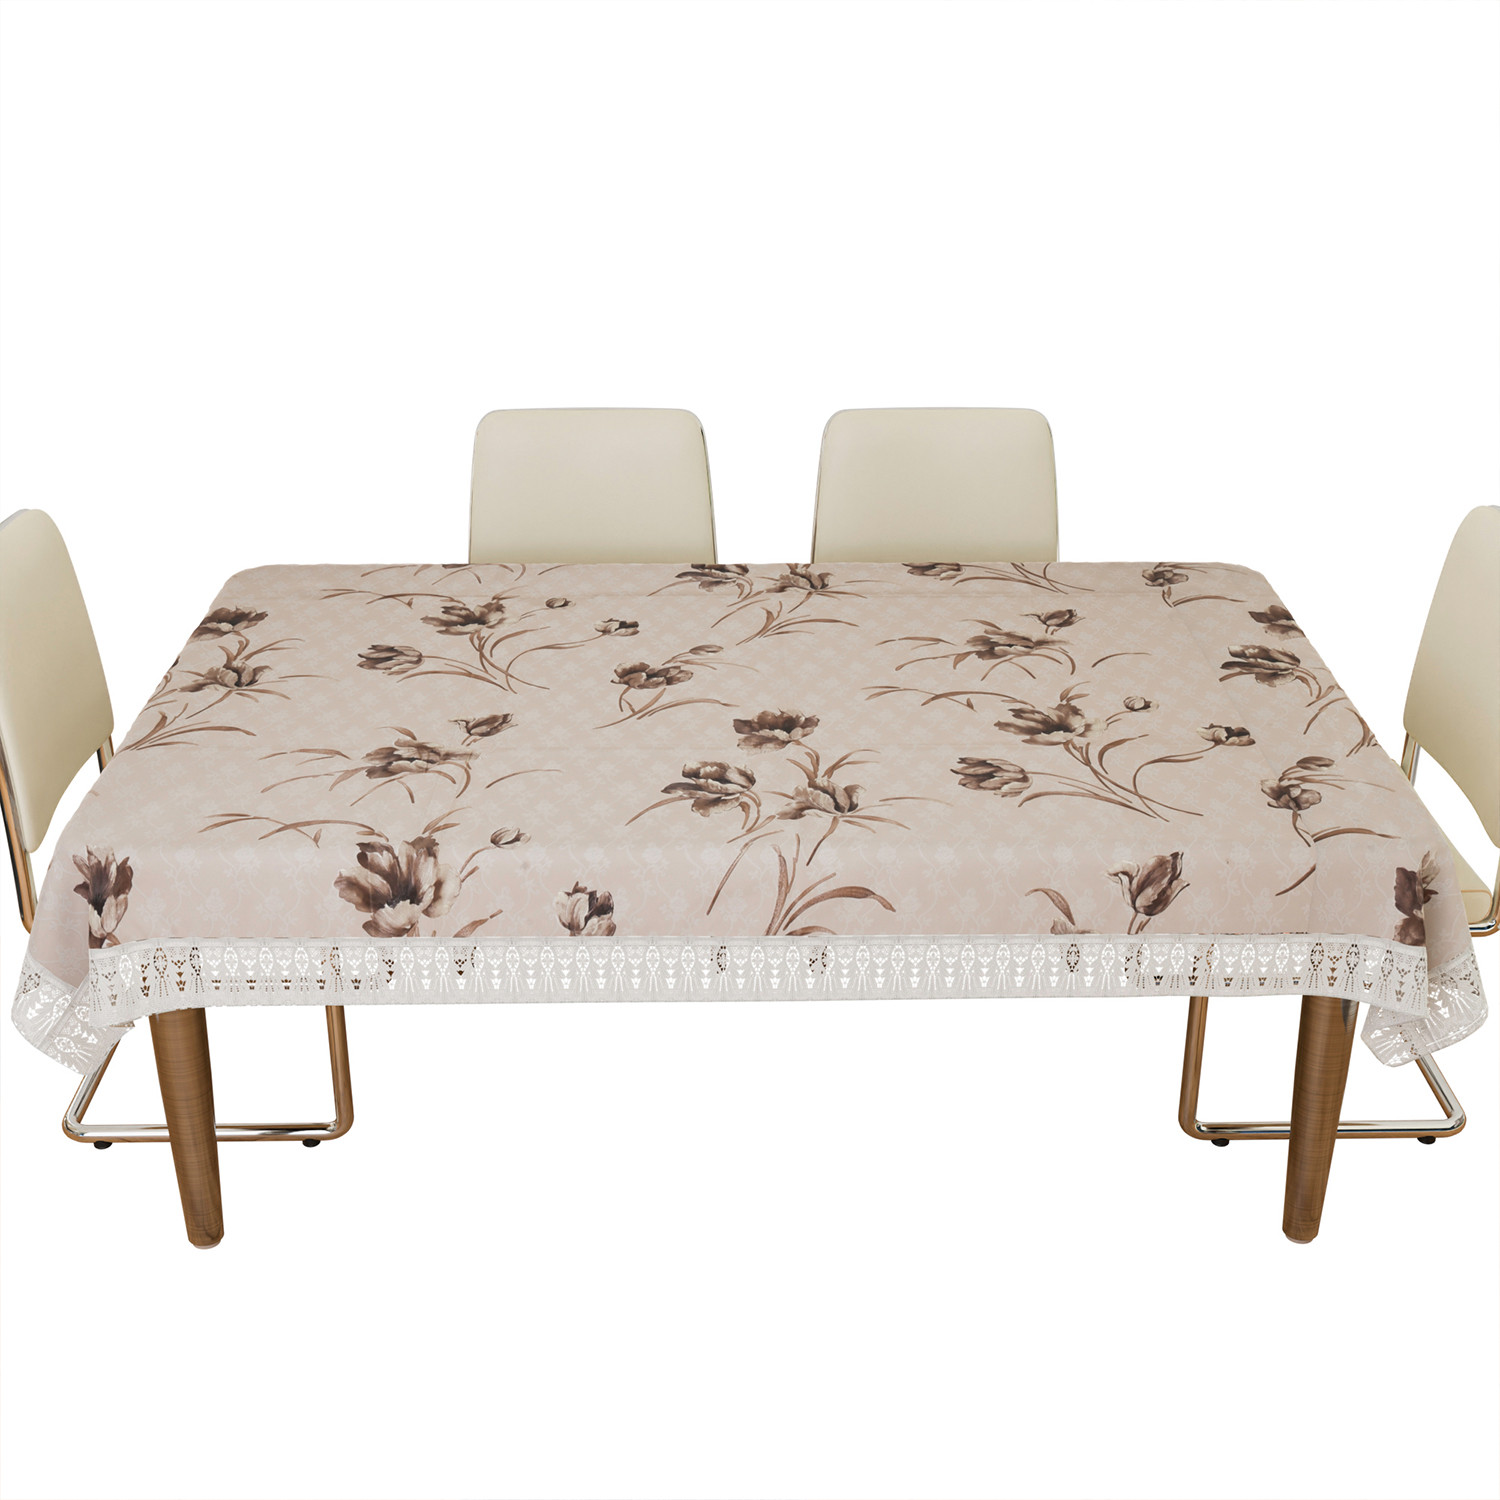 Kuber Industries Dining Table Cover | Heavy PVC Table Cloth Cover | 6 Seater Table Cloth | Flower Table Cover | Table Protector | Table Cover for Dining Table | 60x90 Inch | DTC | Brown